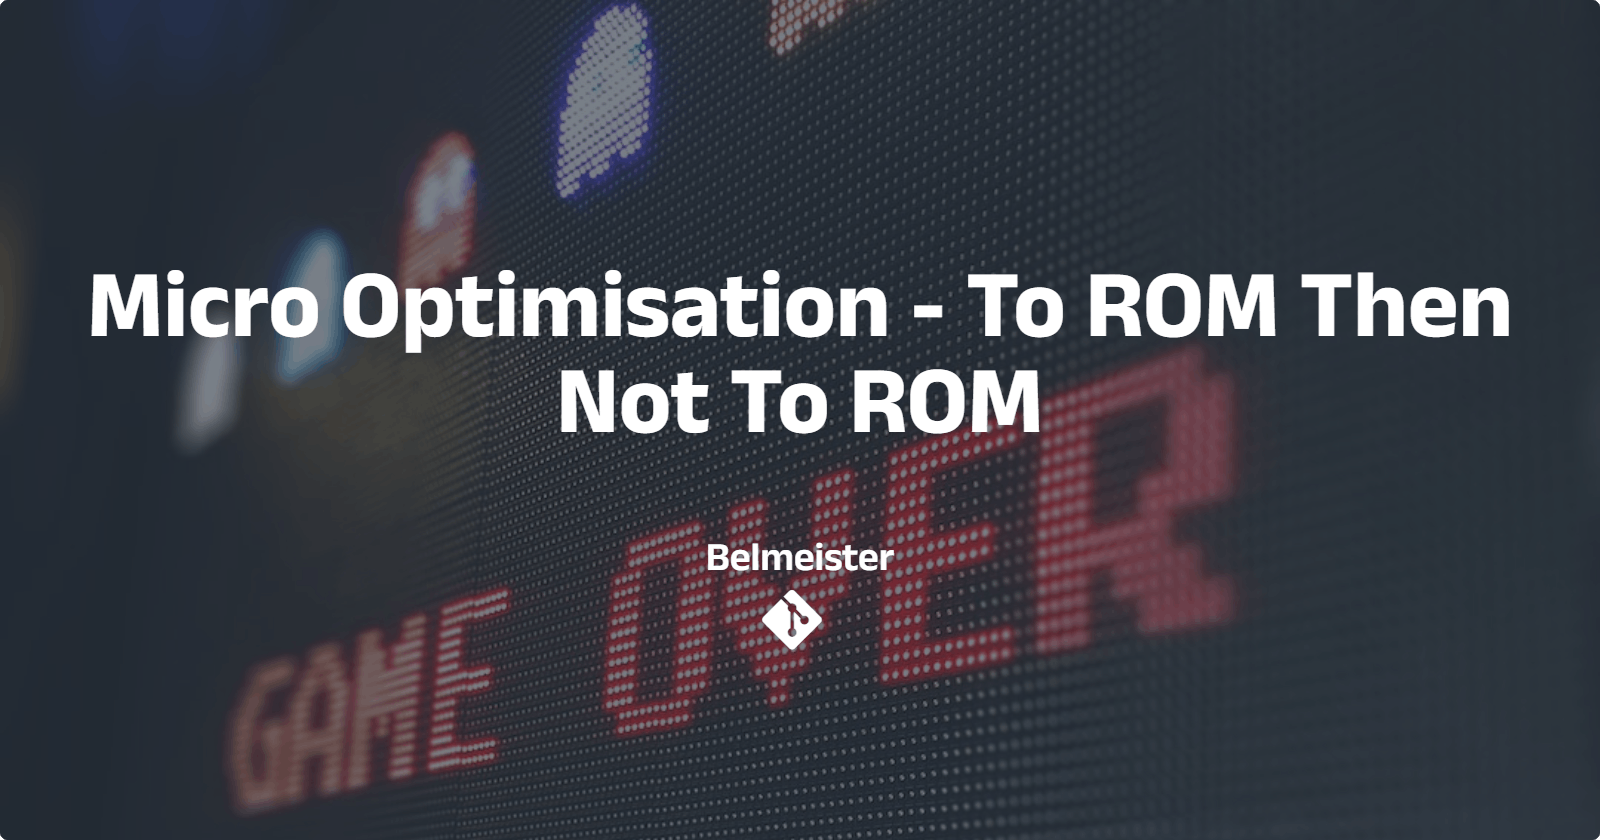 Micro Optimisation - To ROM Then Not To ROM